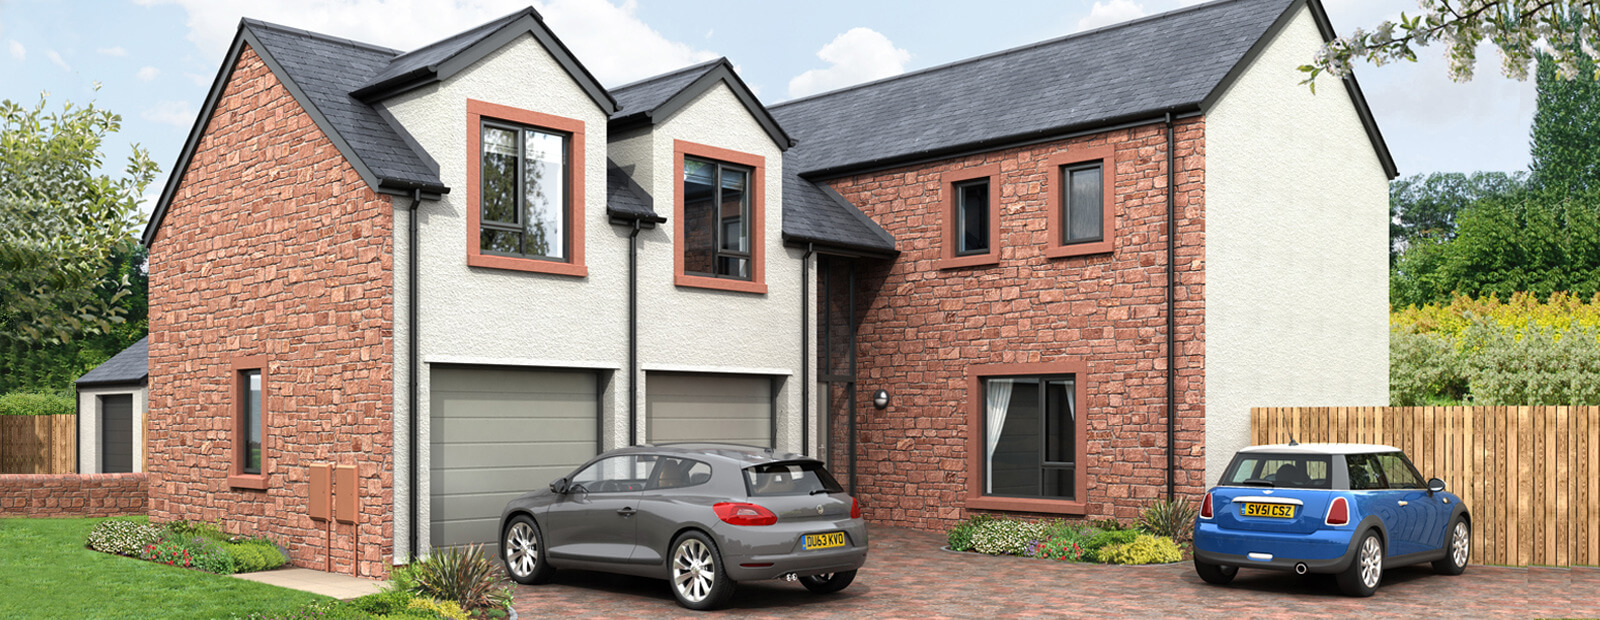 New houses for sale Penrith